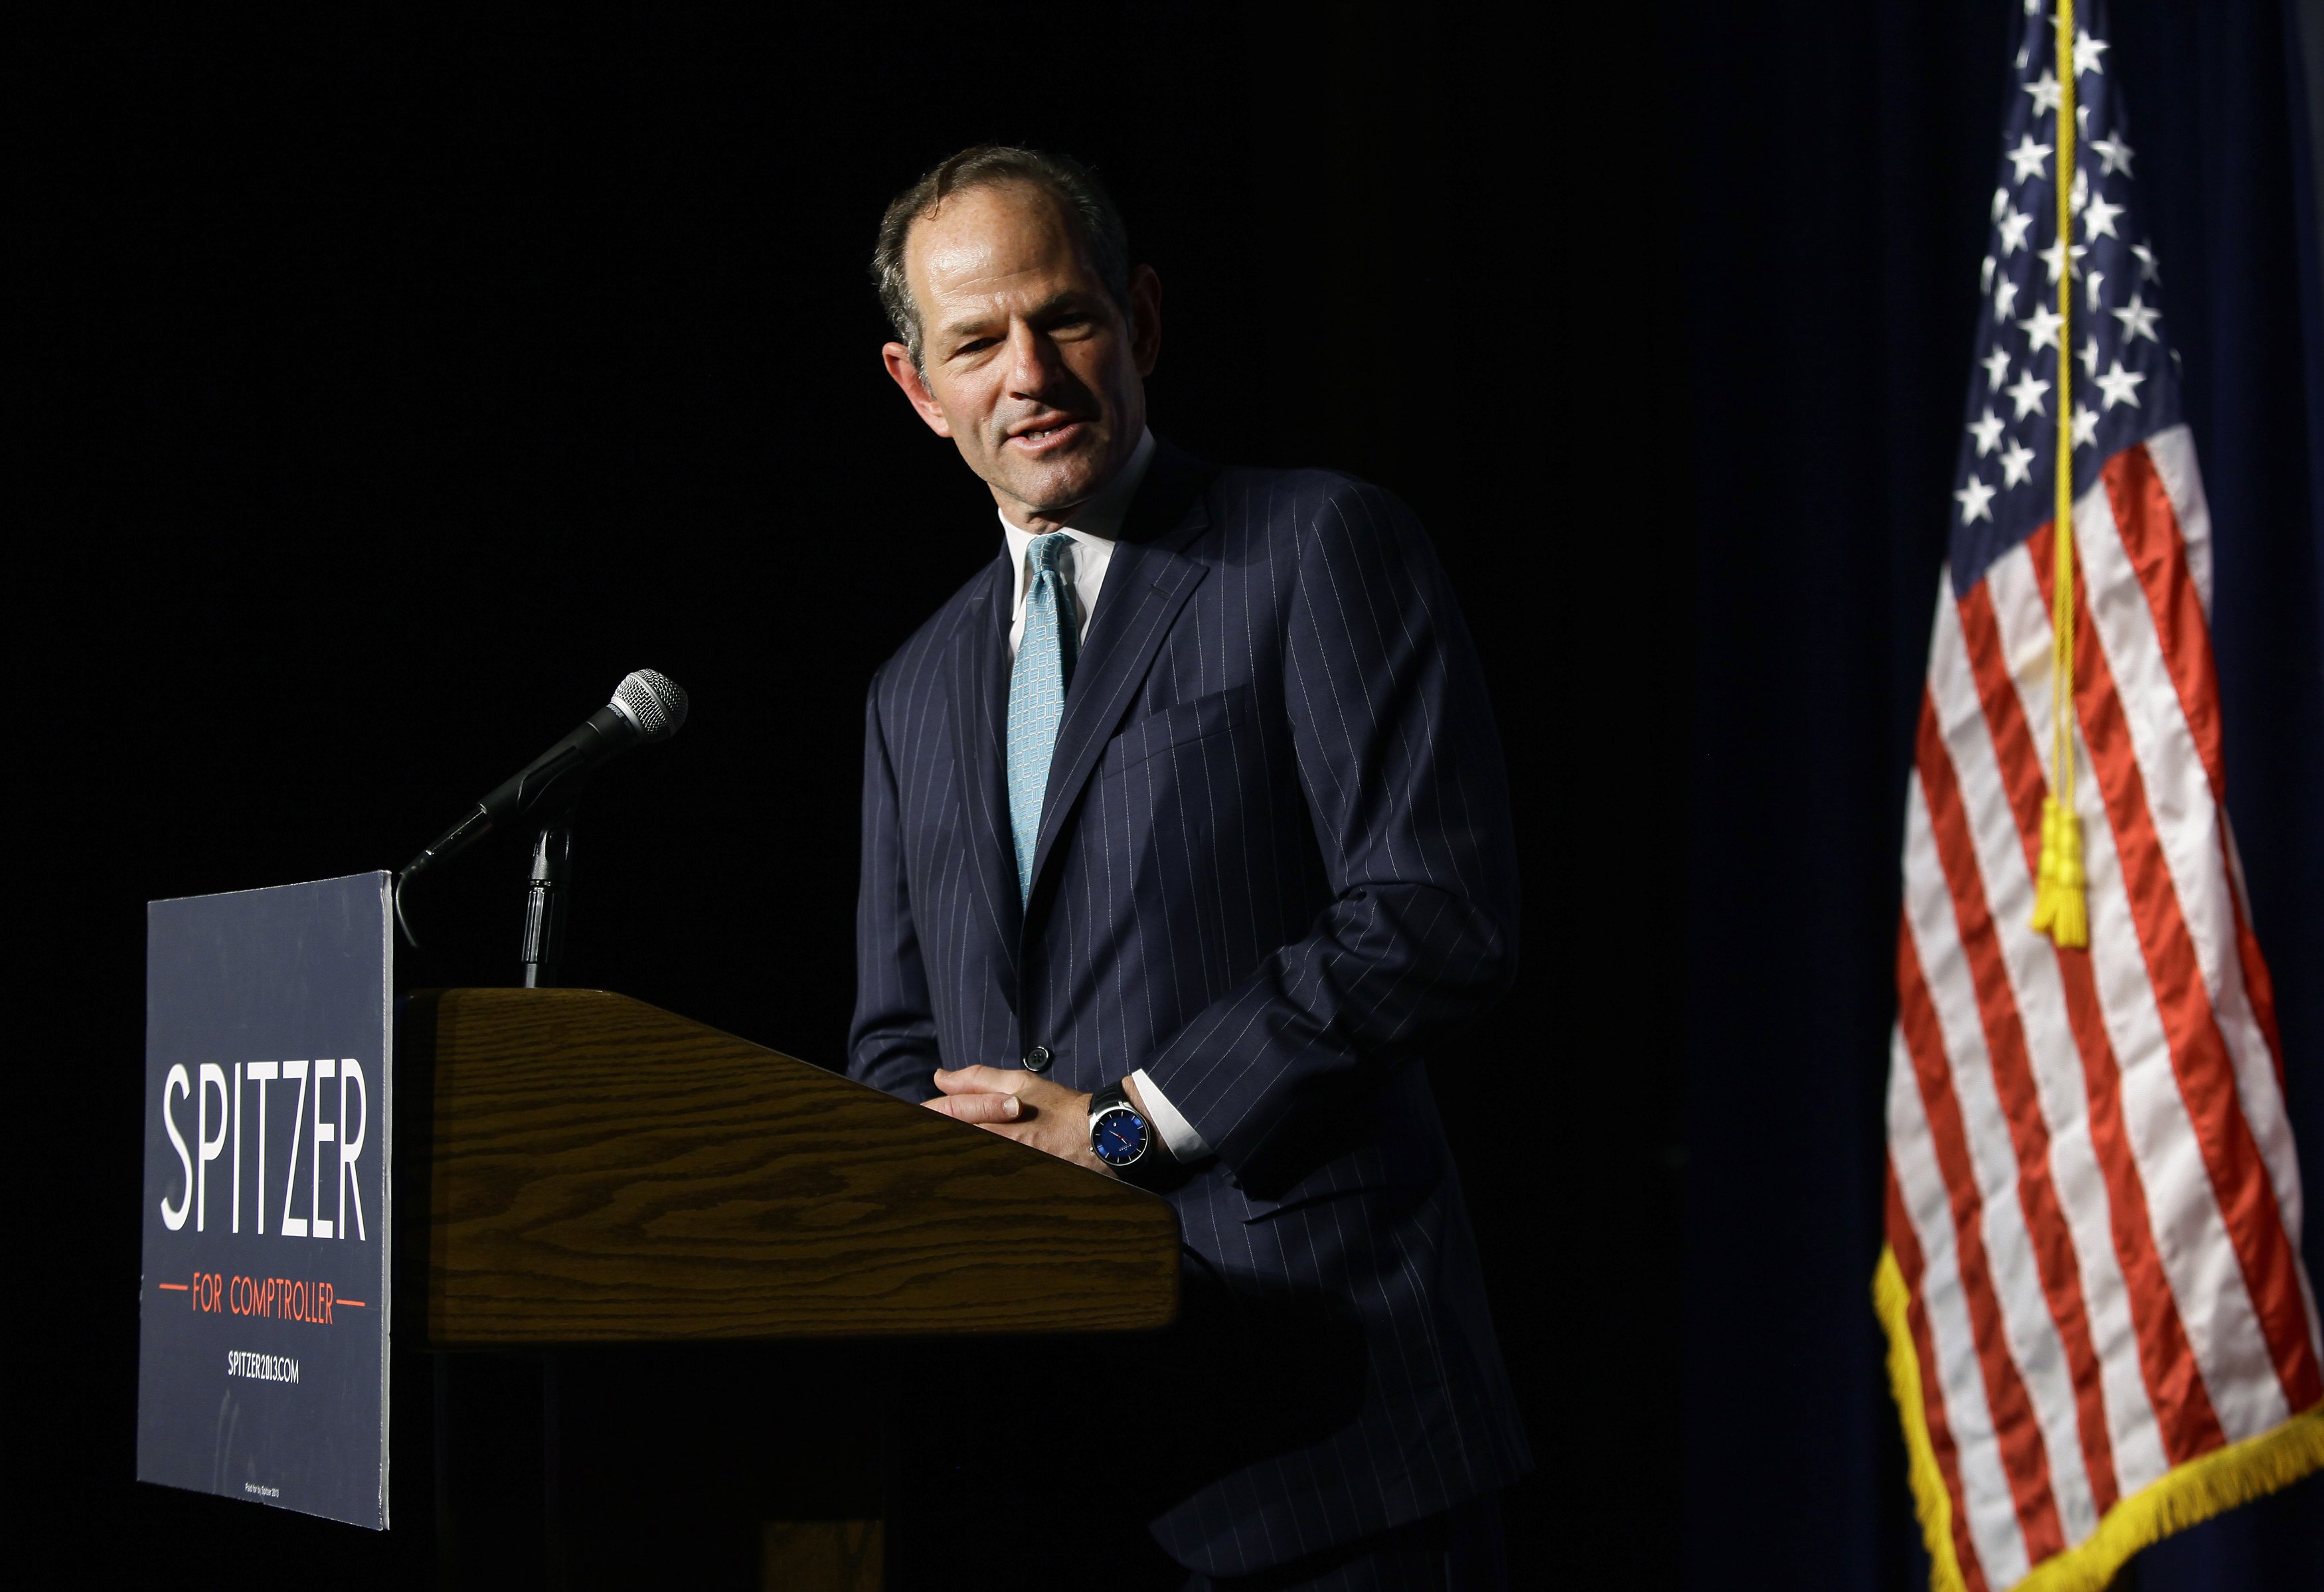 Governor and Mrs. Spitzer End Marriage